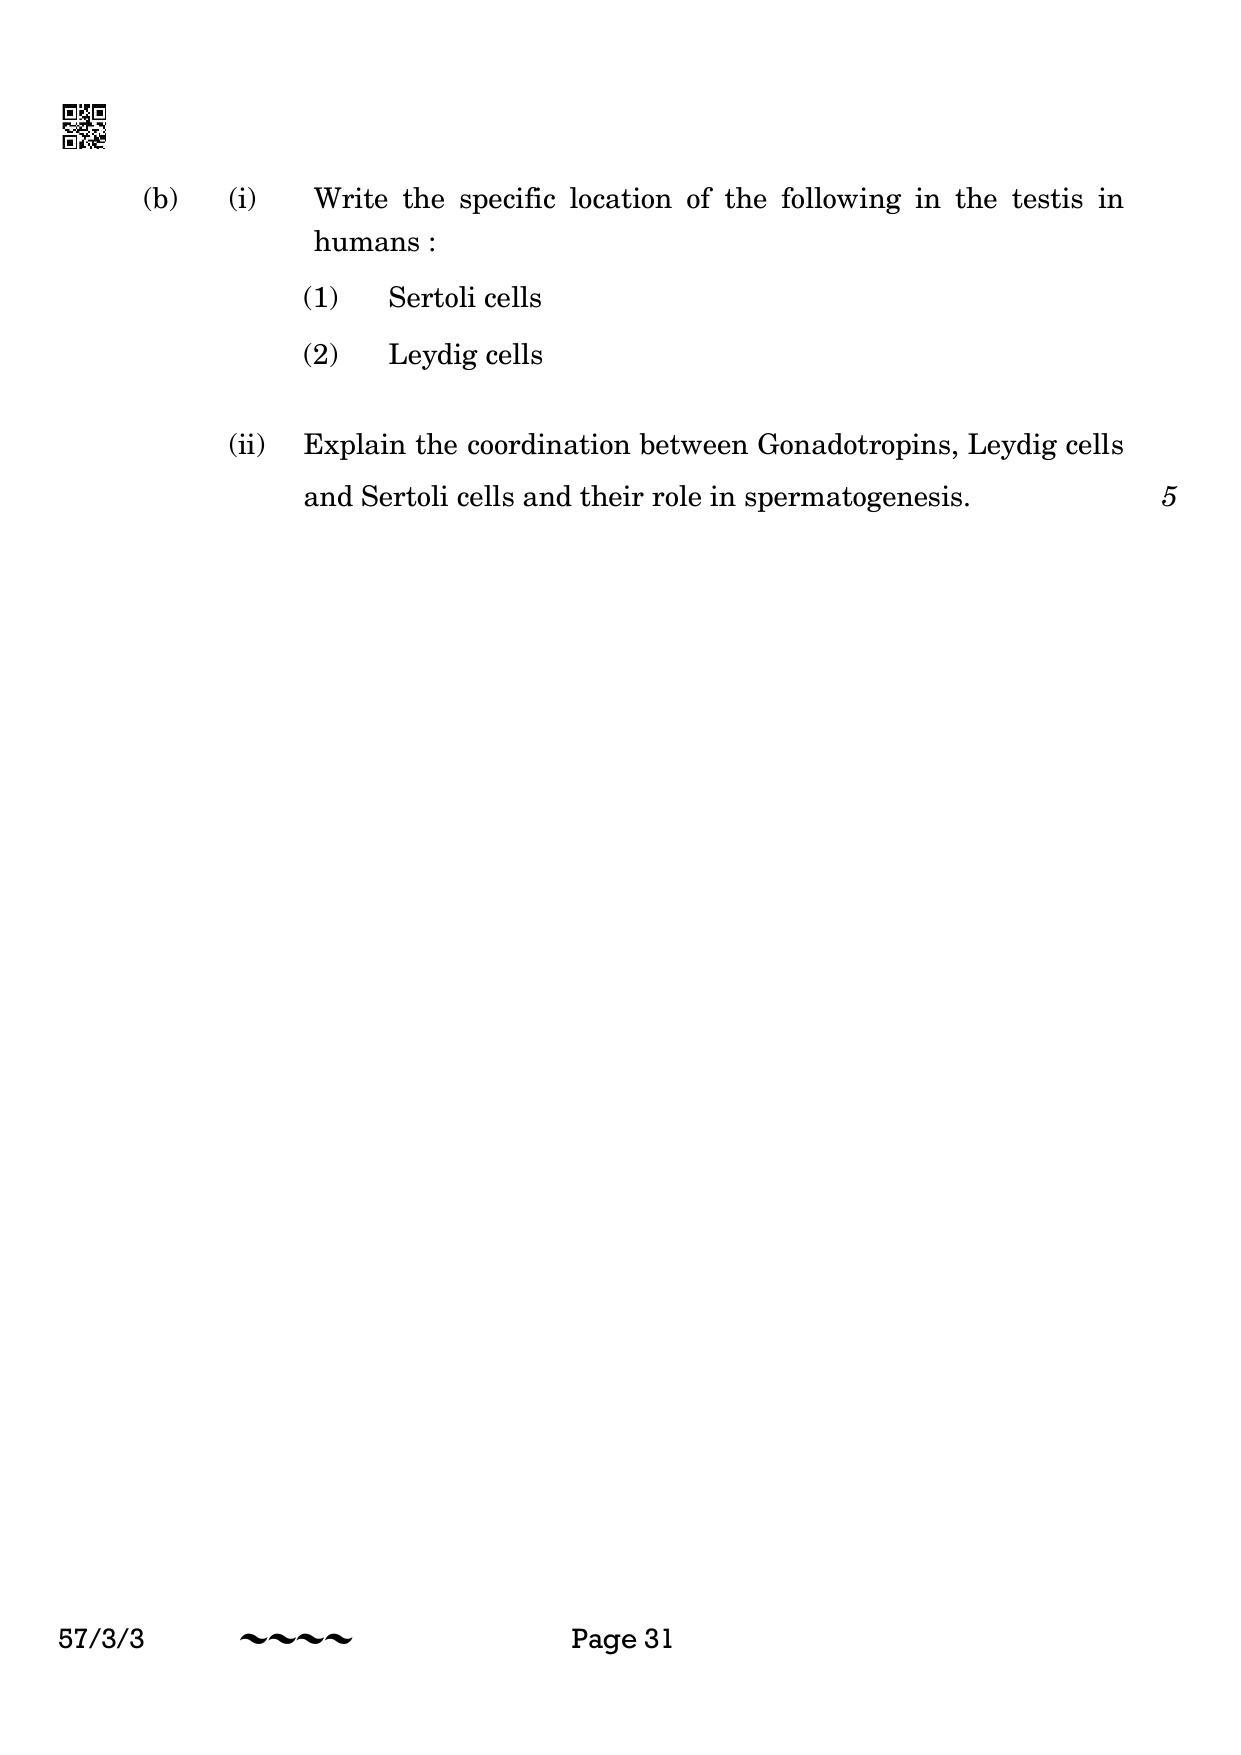 CBSE Class 12 57-3-3 Biology 2023 Question Paper - Page 31